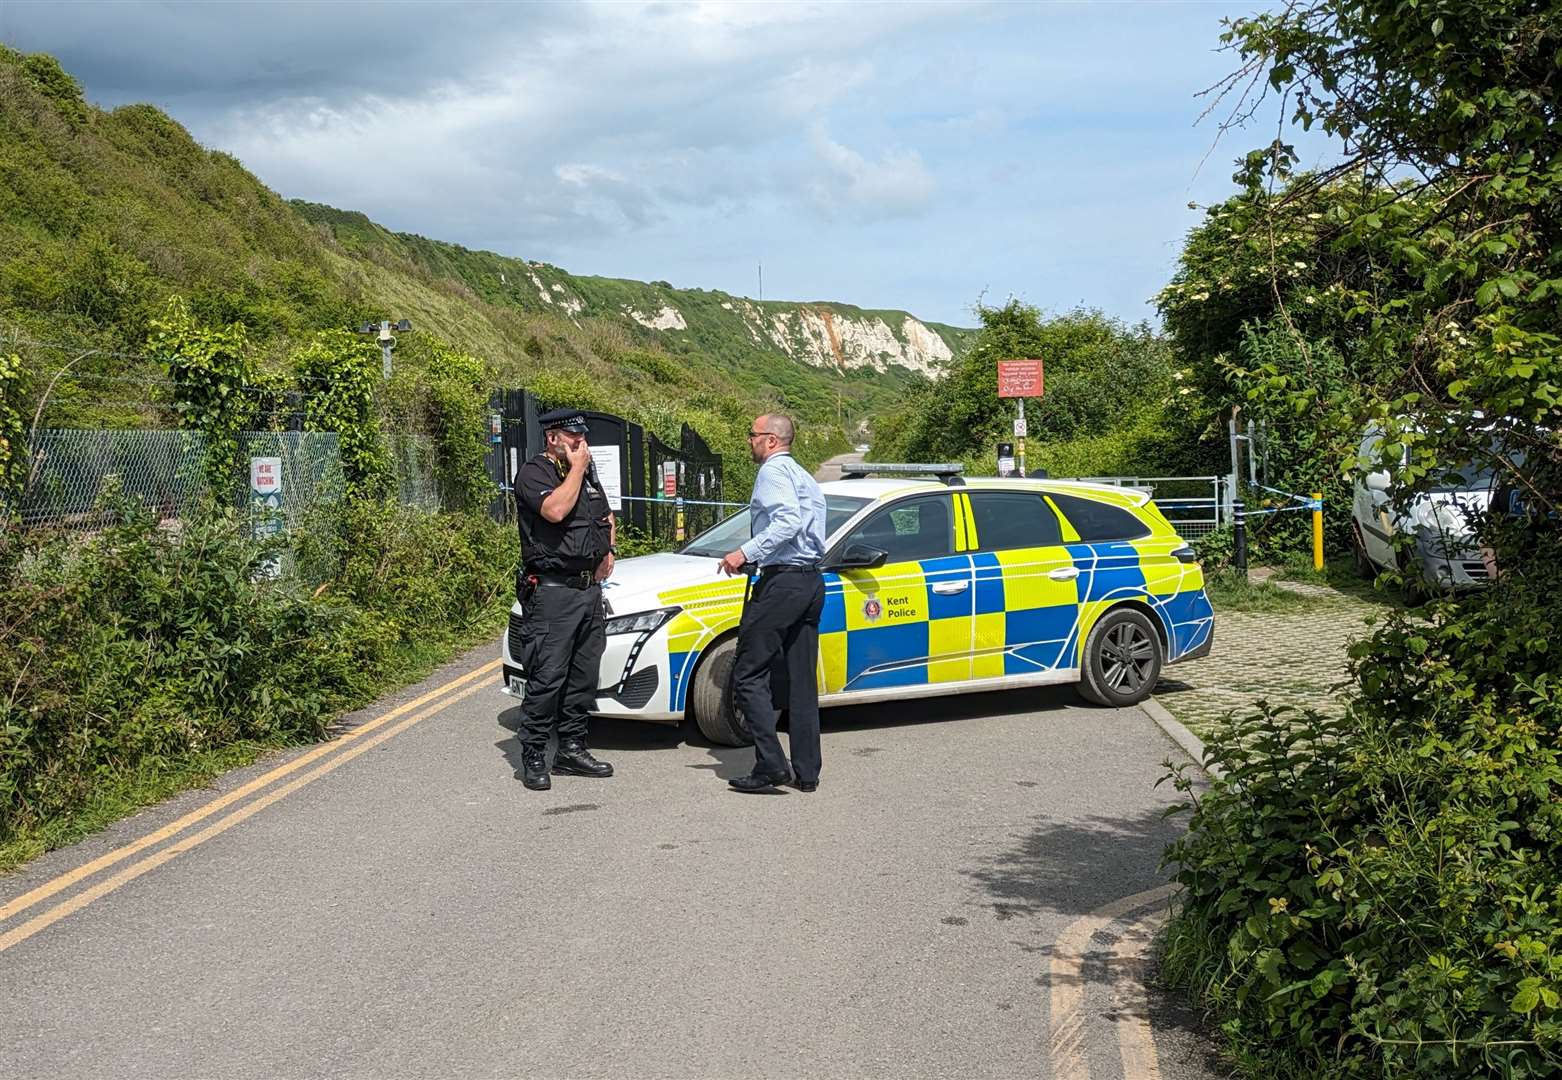 Police taped off The Warren, where the body of a woman was found in undergrowth this afternoon